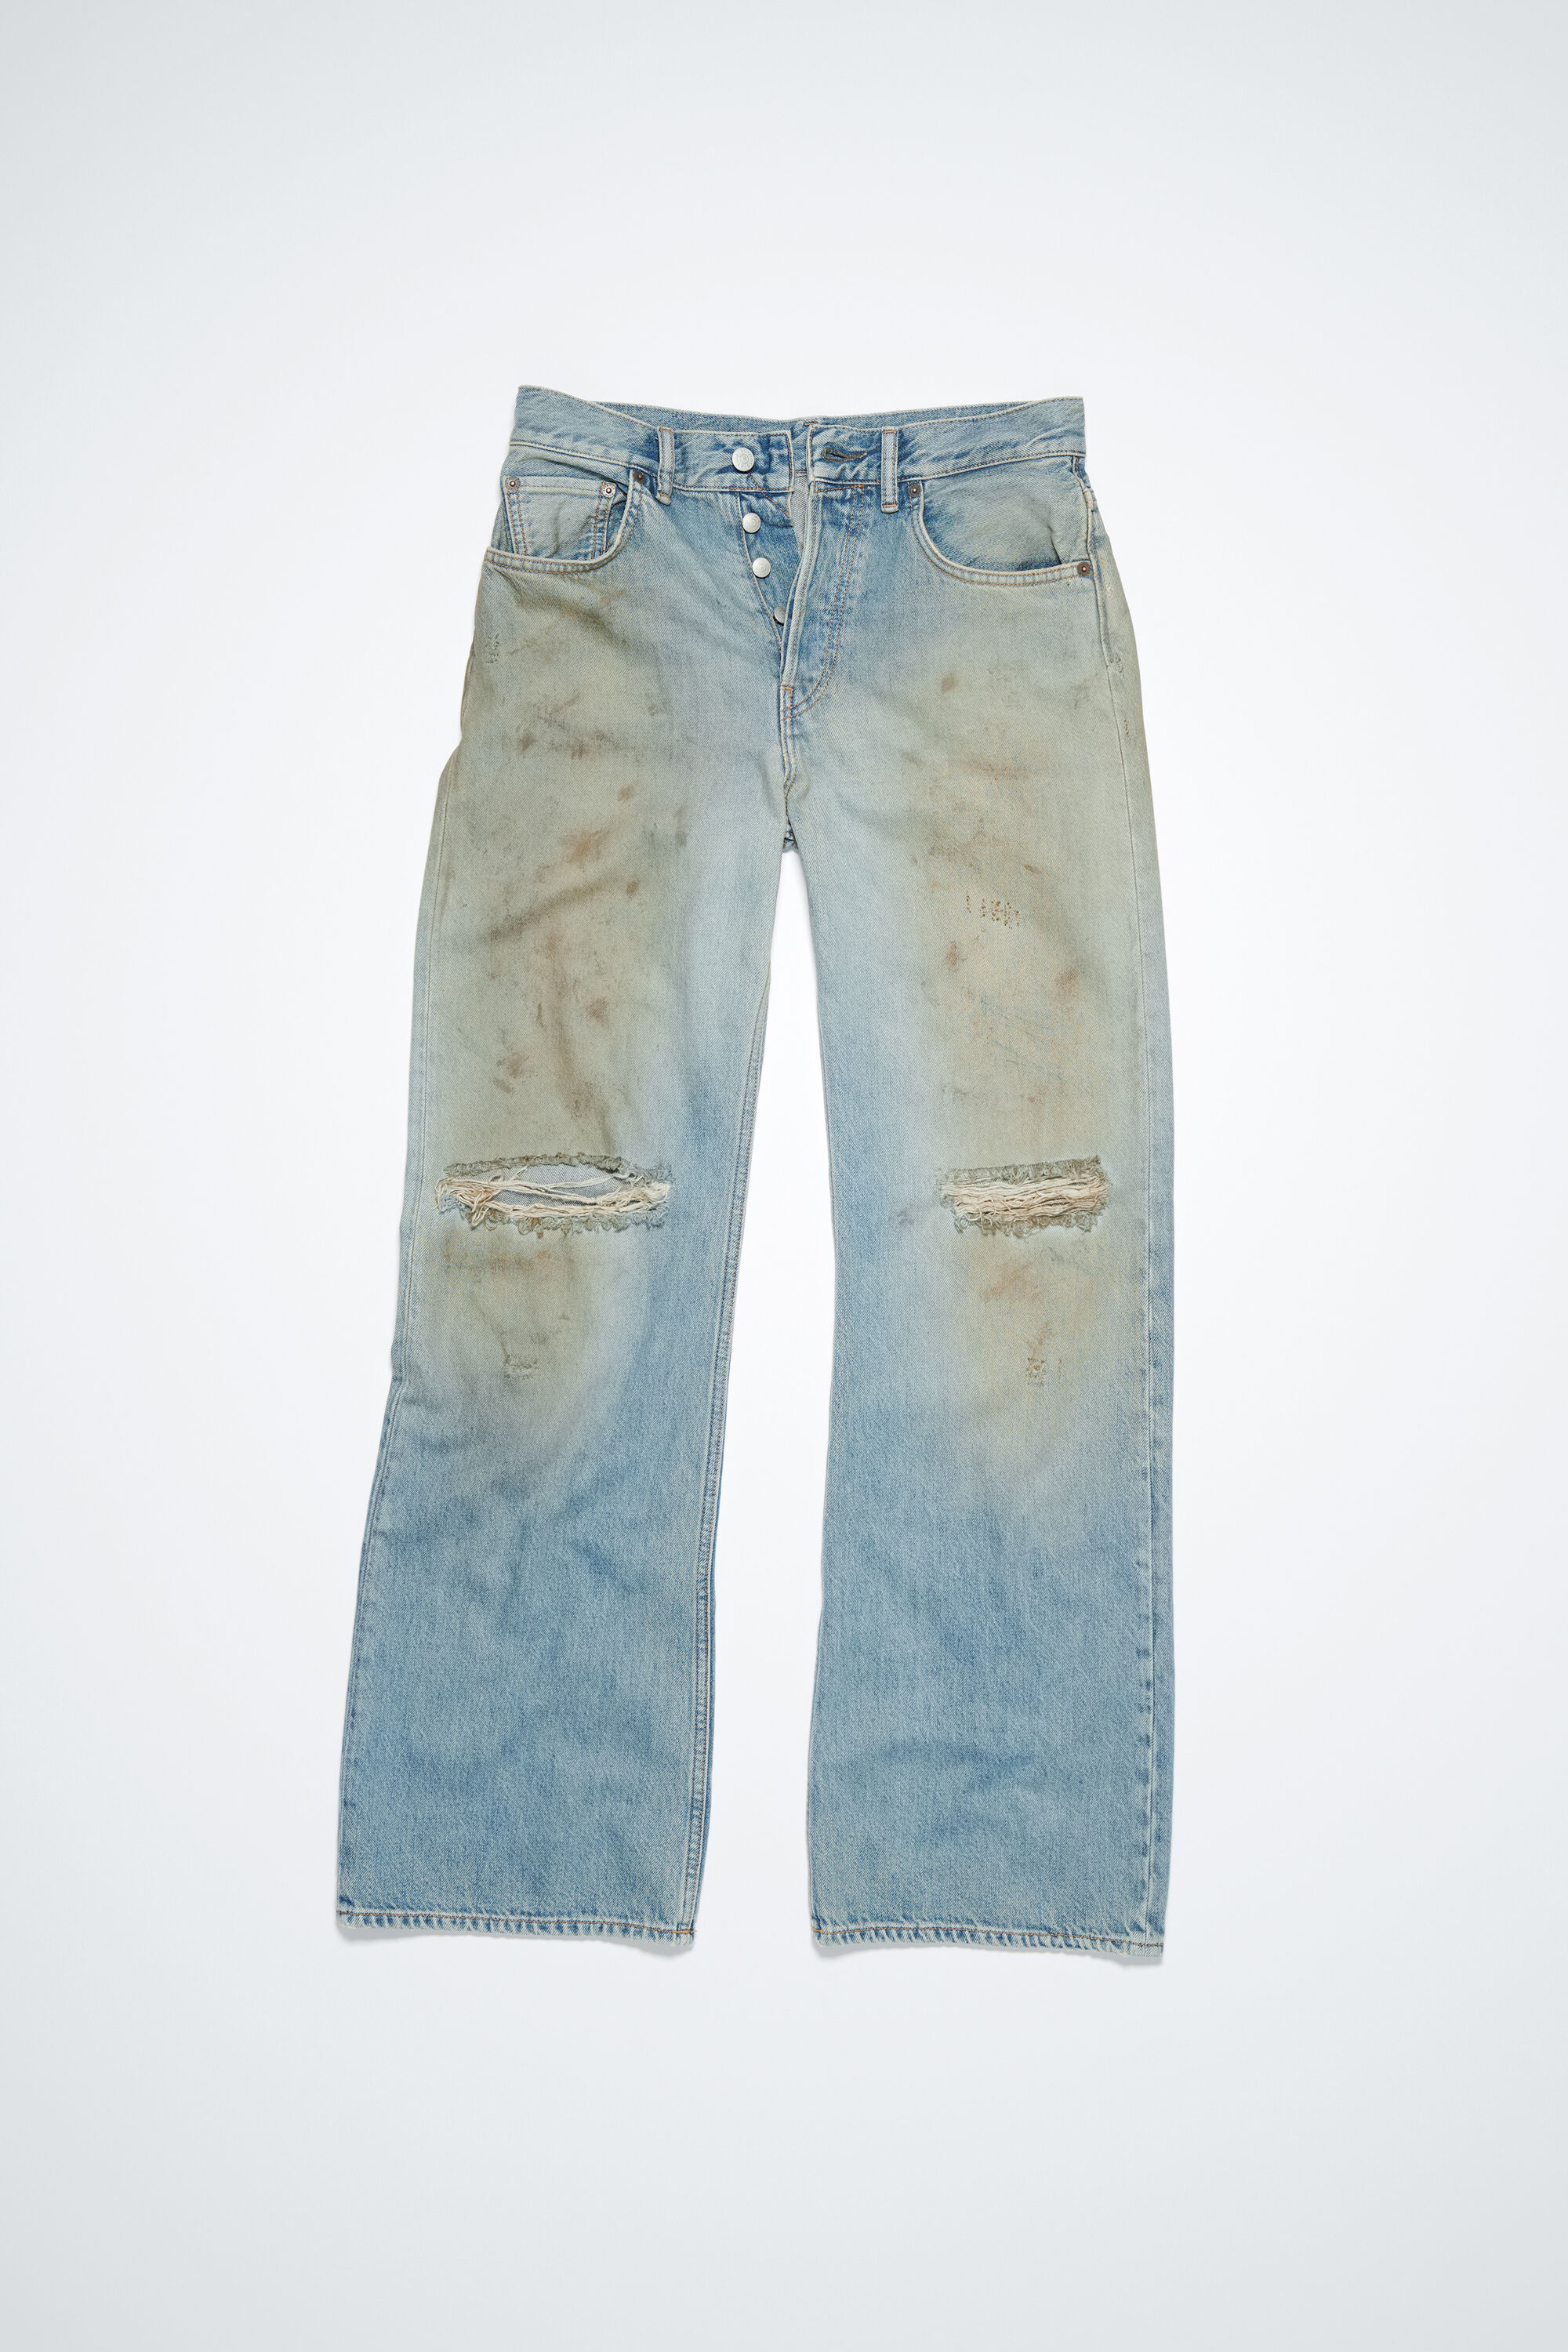 Acne Studios - Loose fit jeans - 2021F - Mid blue